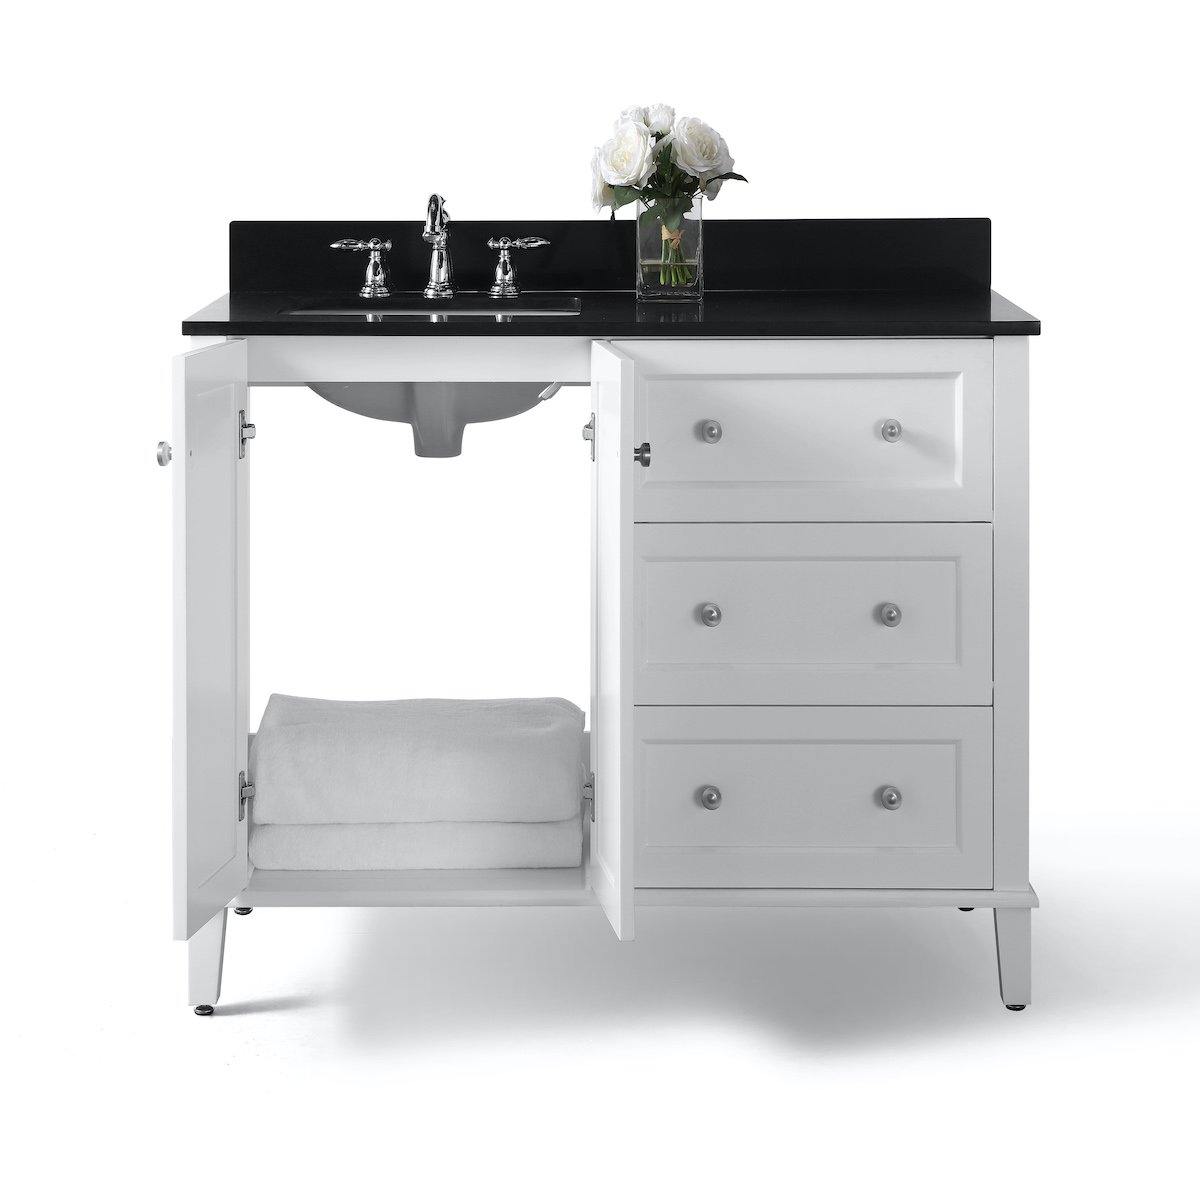 Ancerre Designs Hannah 48 Inch White Single Vanity with Left Basin and Nickel Hardware Open Cabinet